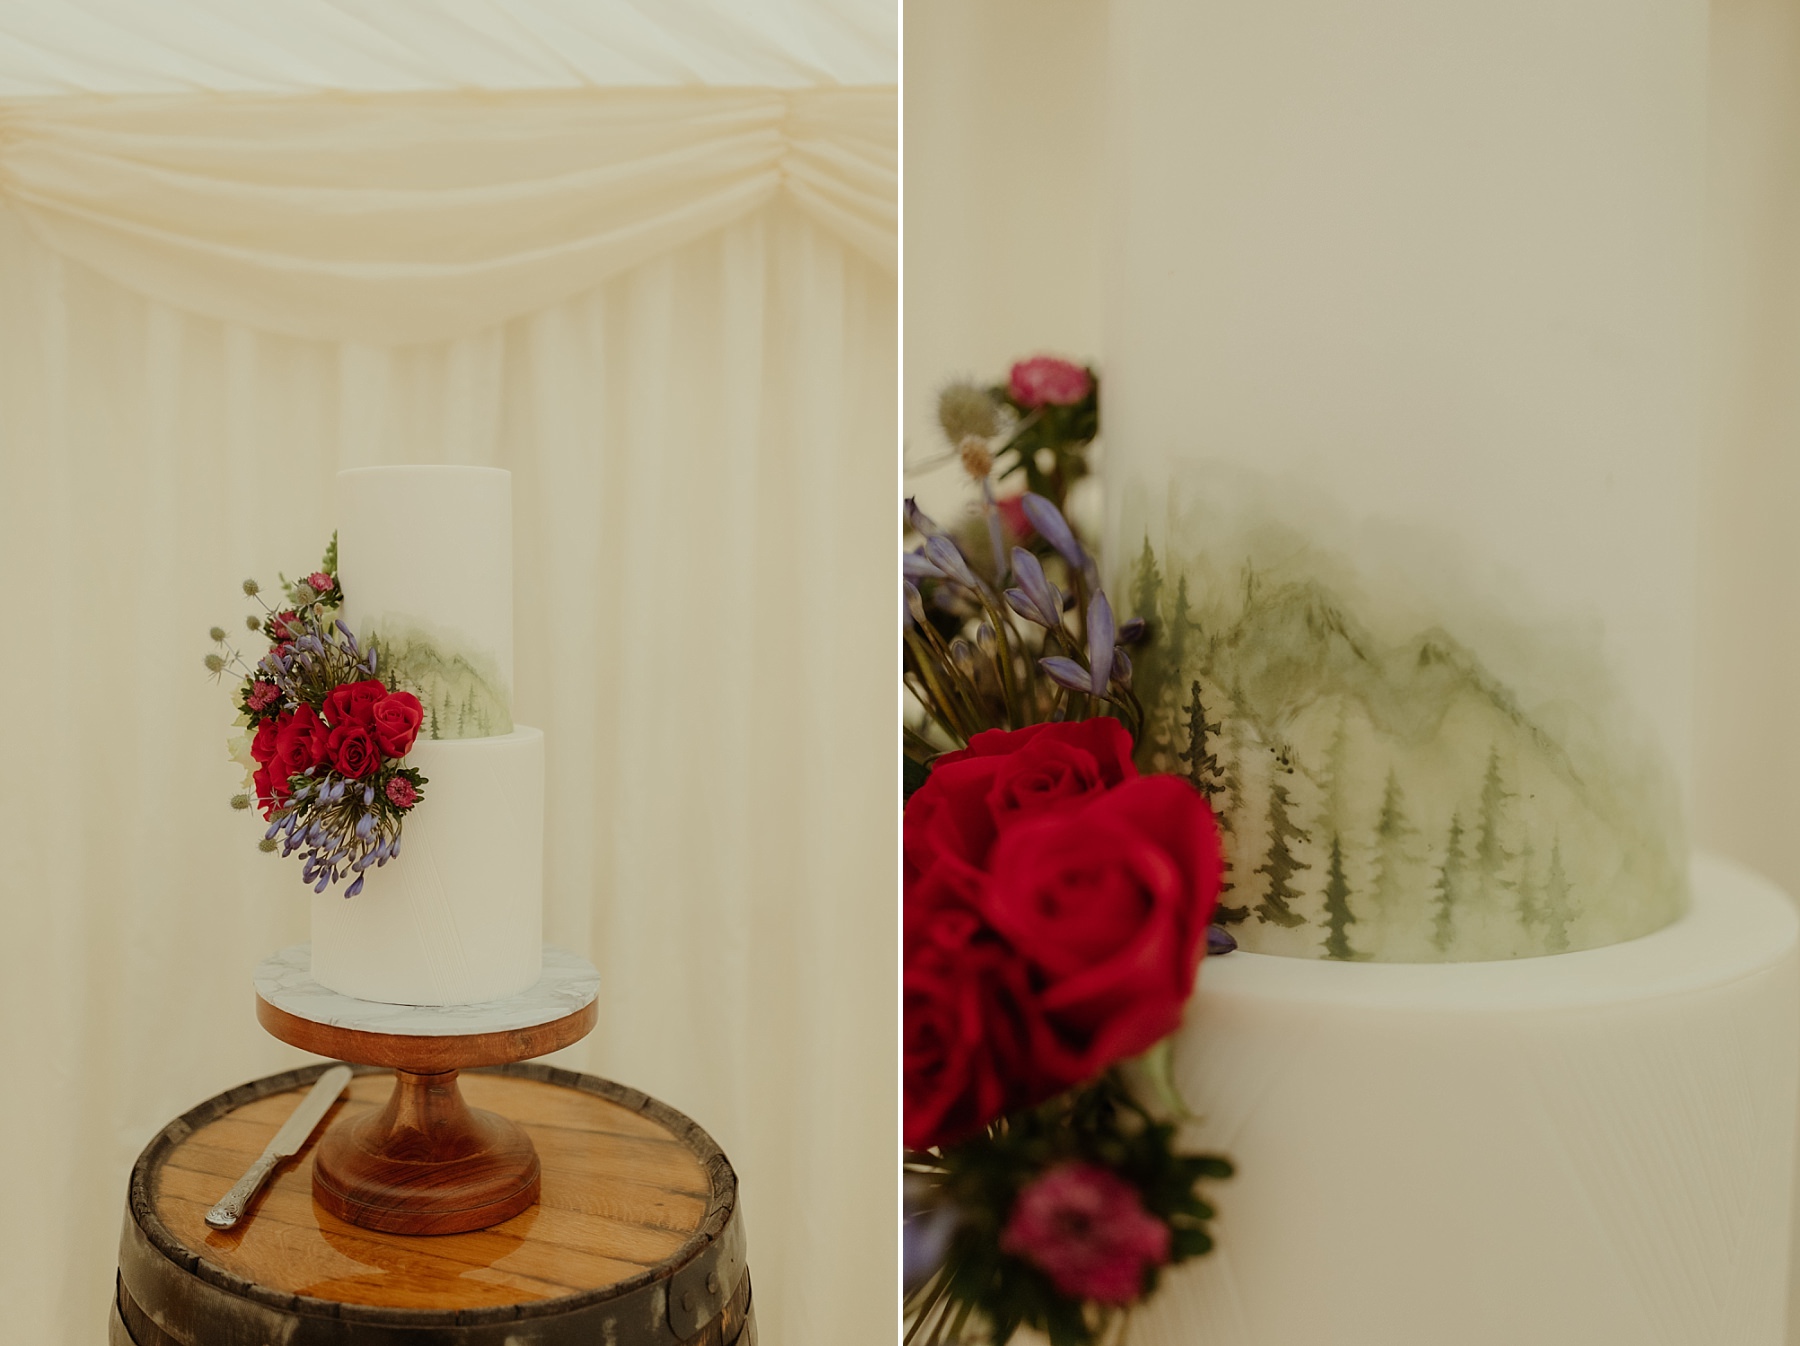 love laura lane hand painted wedding cake with mountains and trees at cluny castle wedding scotland